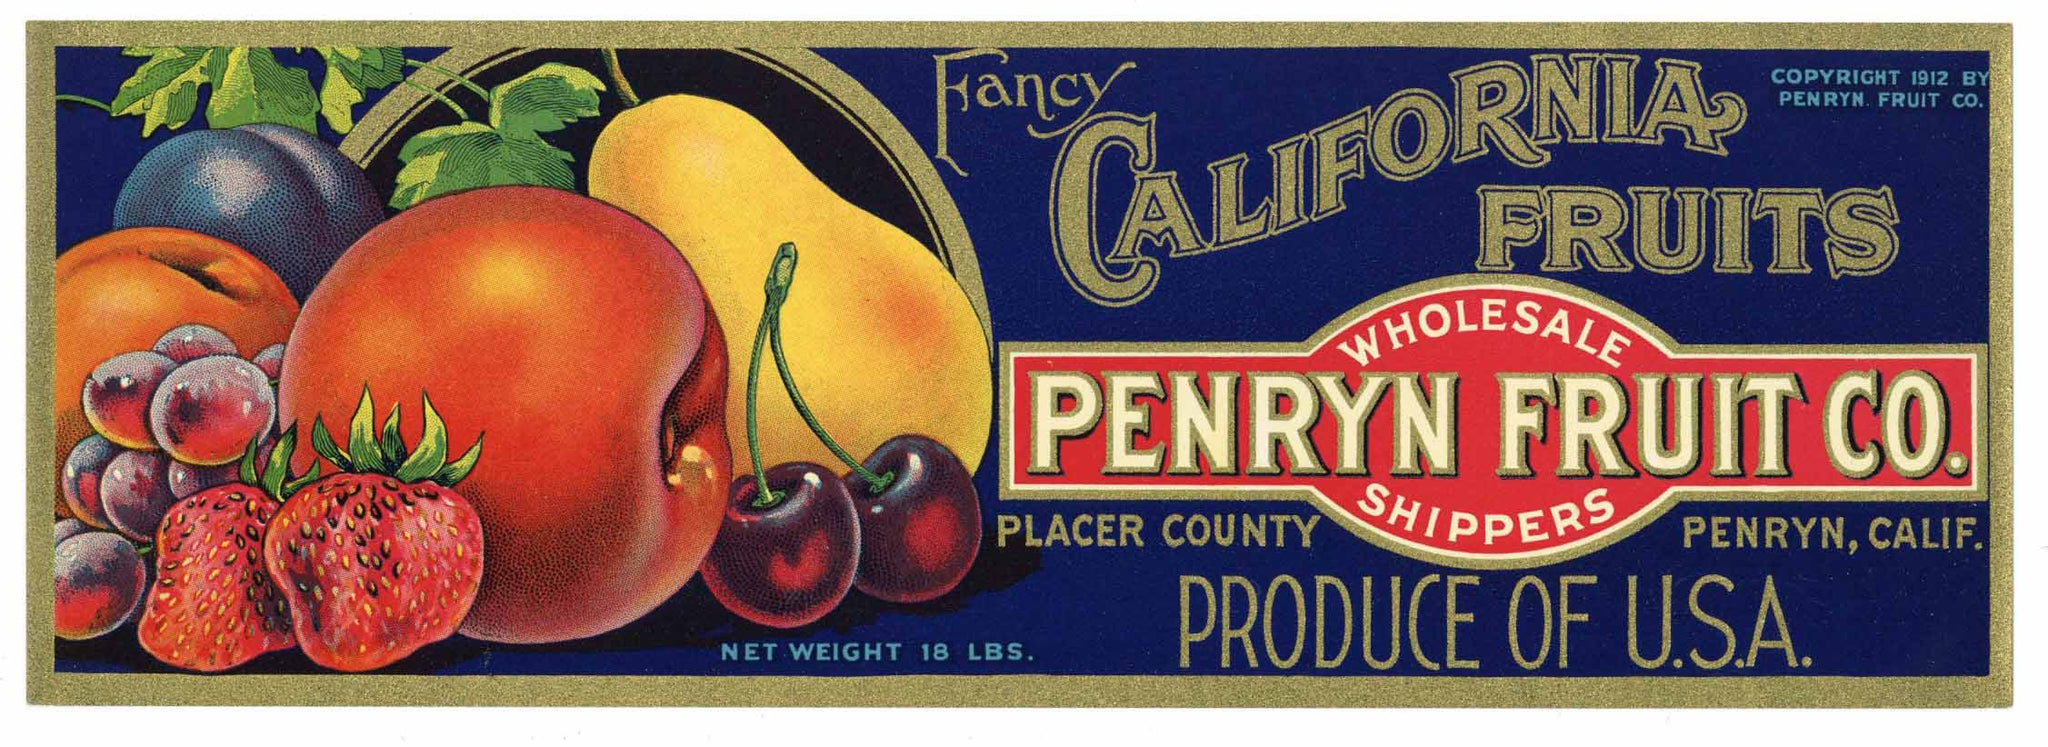 Penryn Fruit Co. Brand Vintage Placer County Fruit Crate Label, strawberry